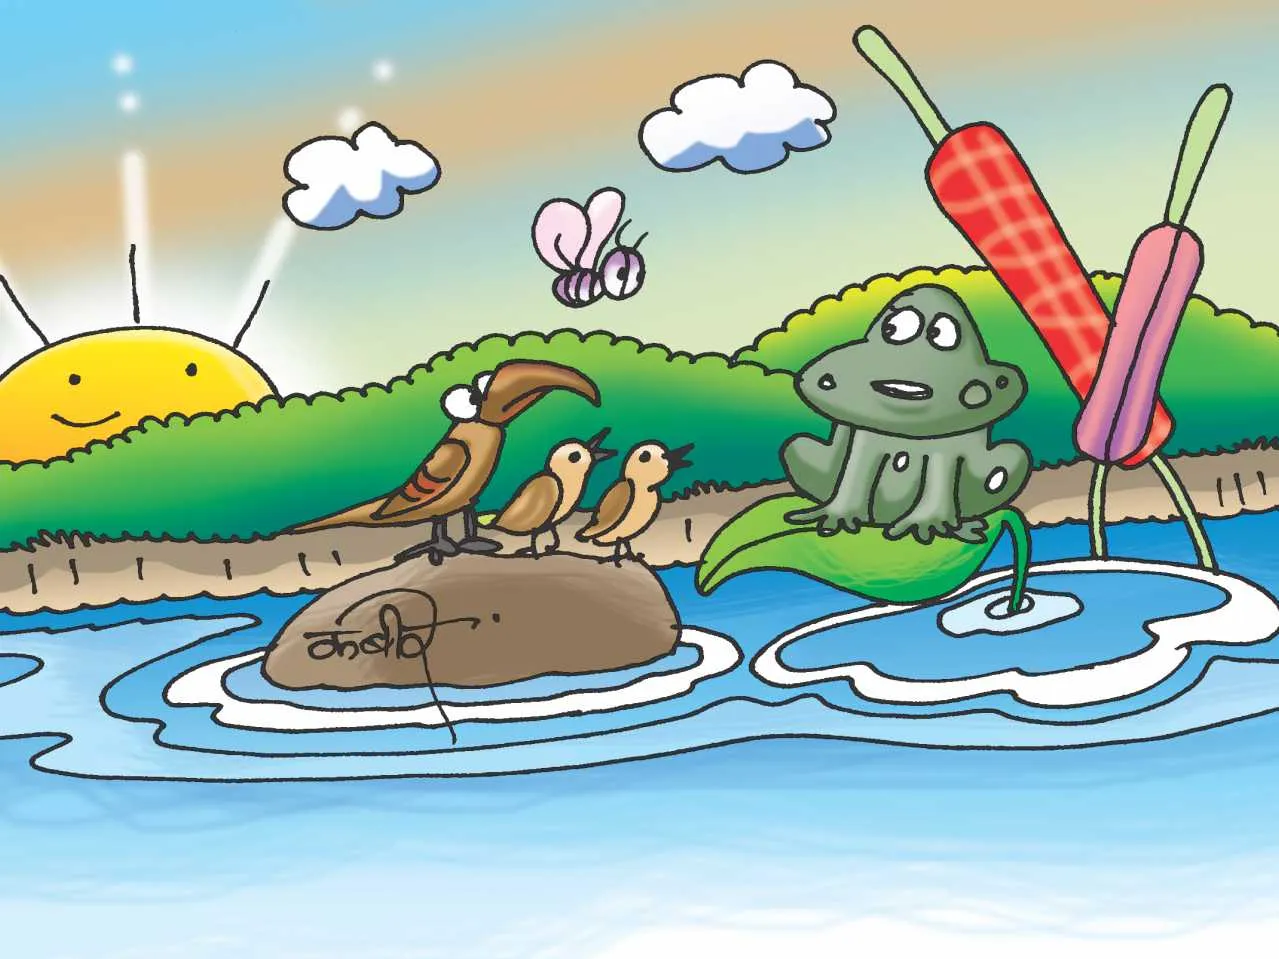 Frog and birds in pond cartoon image